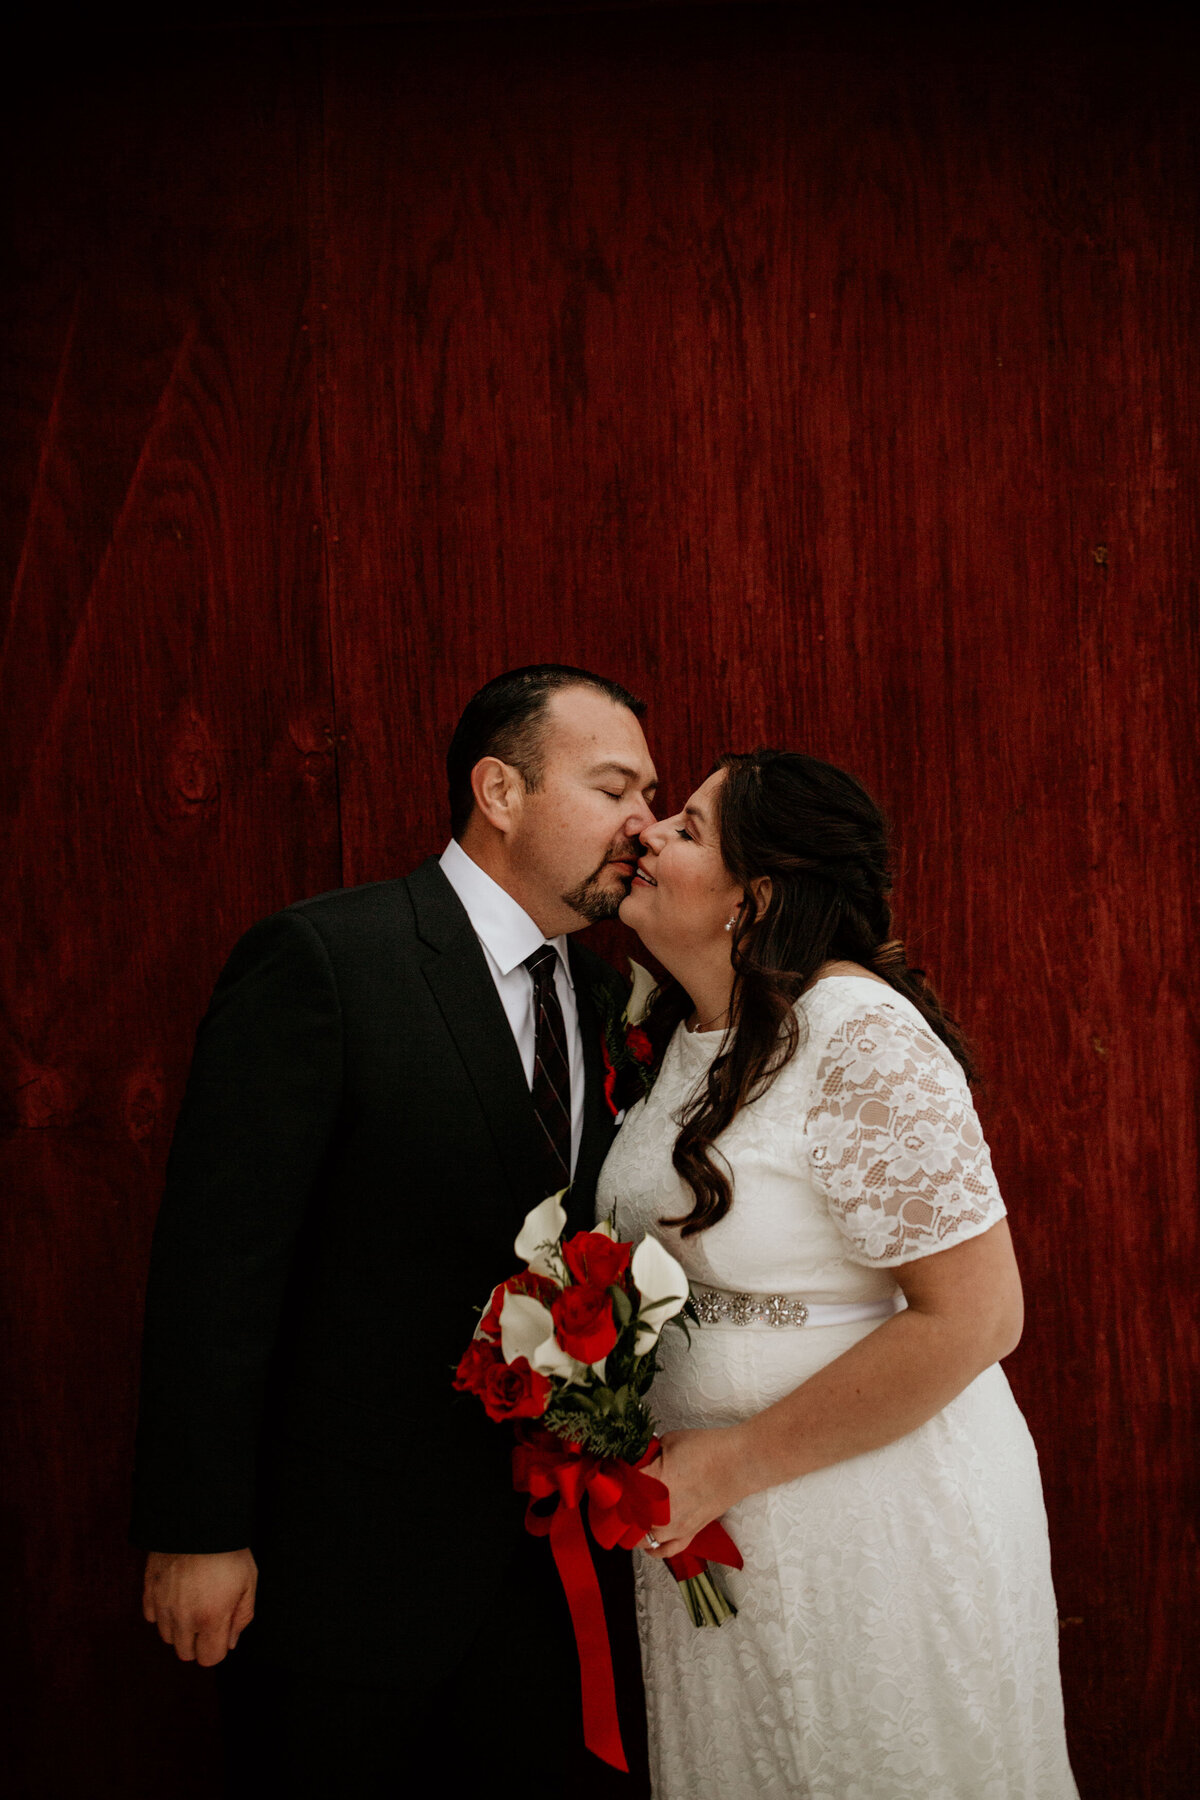 groom kissing bride on cheek in front of a red barn wall